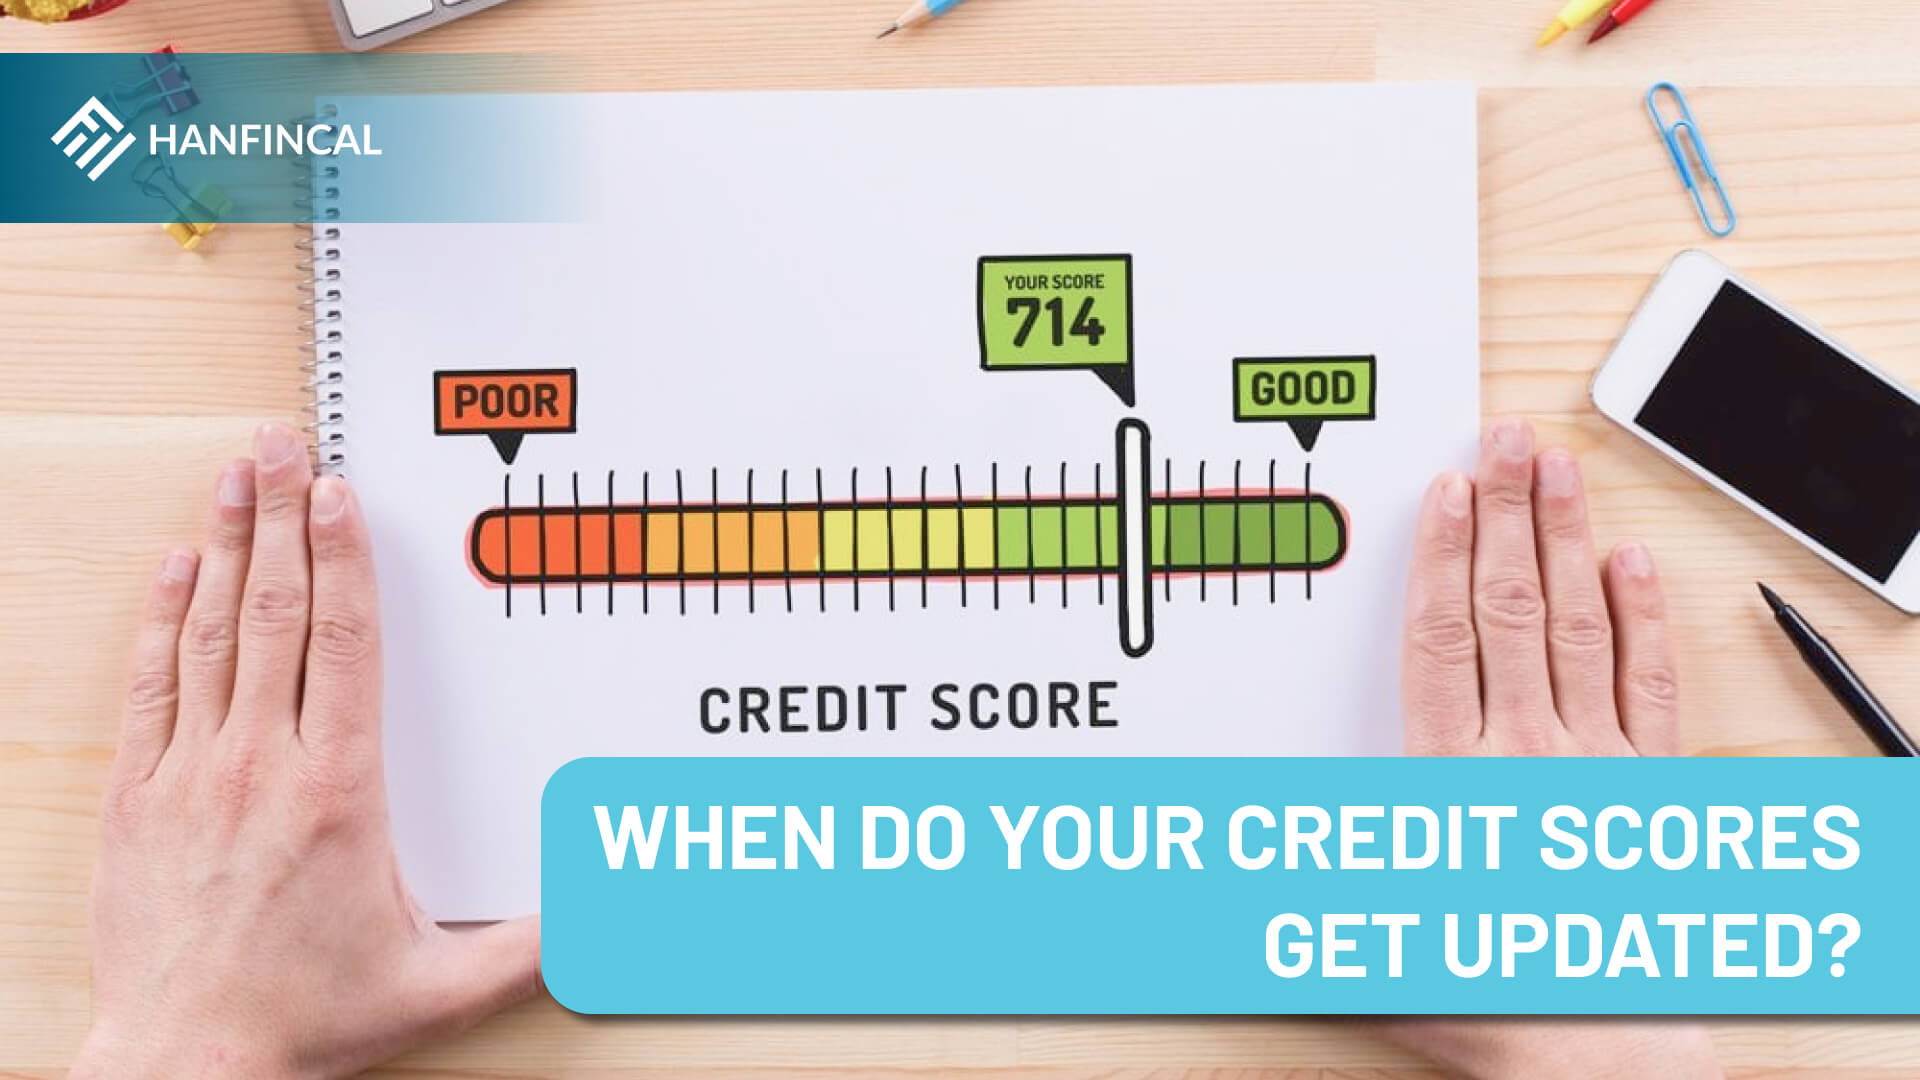 How often is your credit report updated?